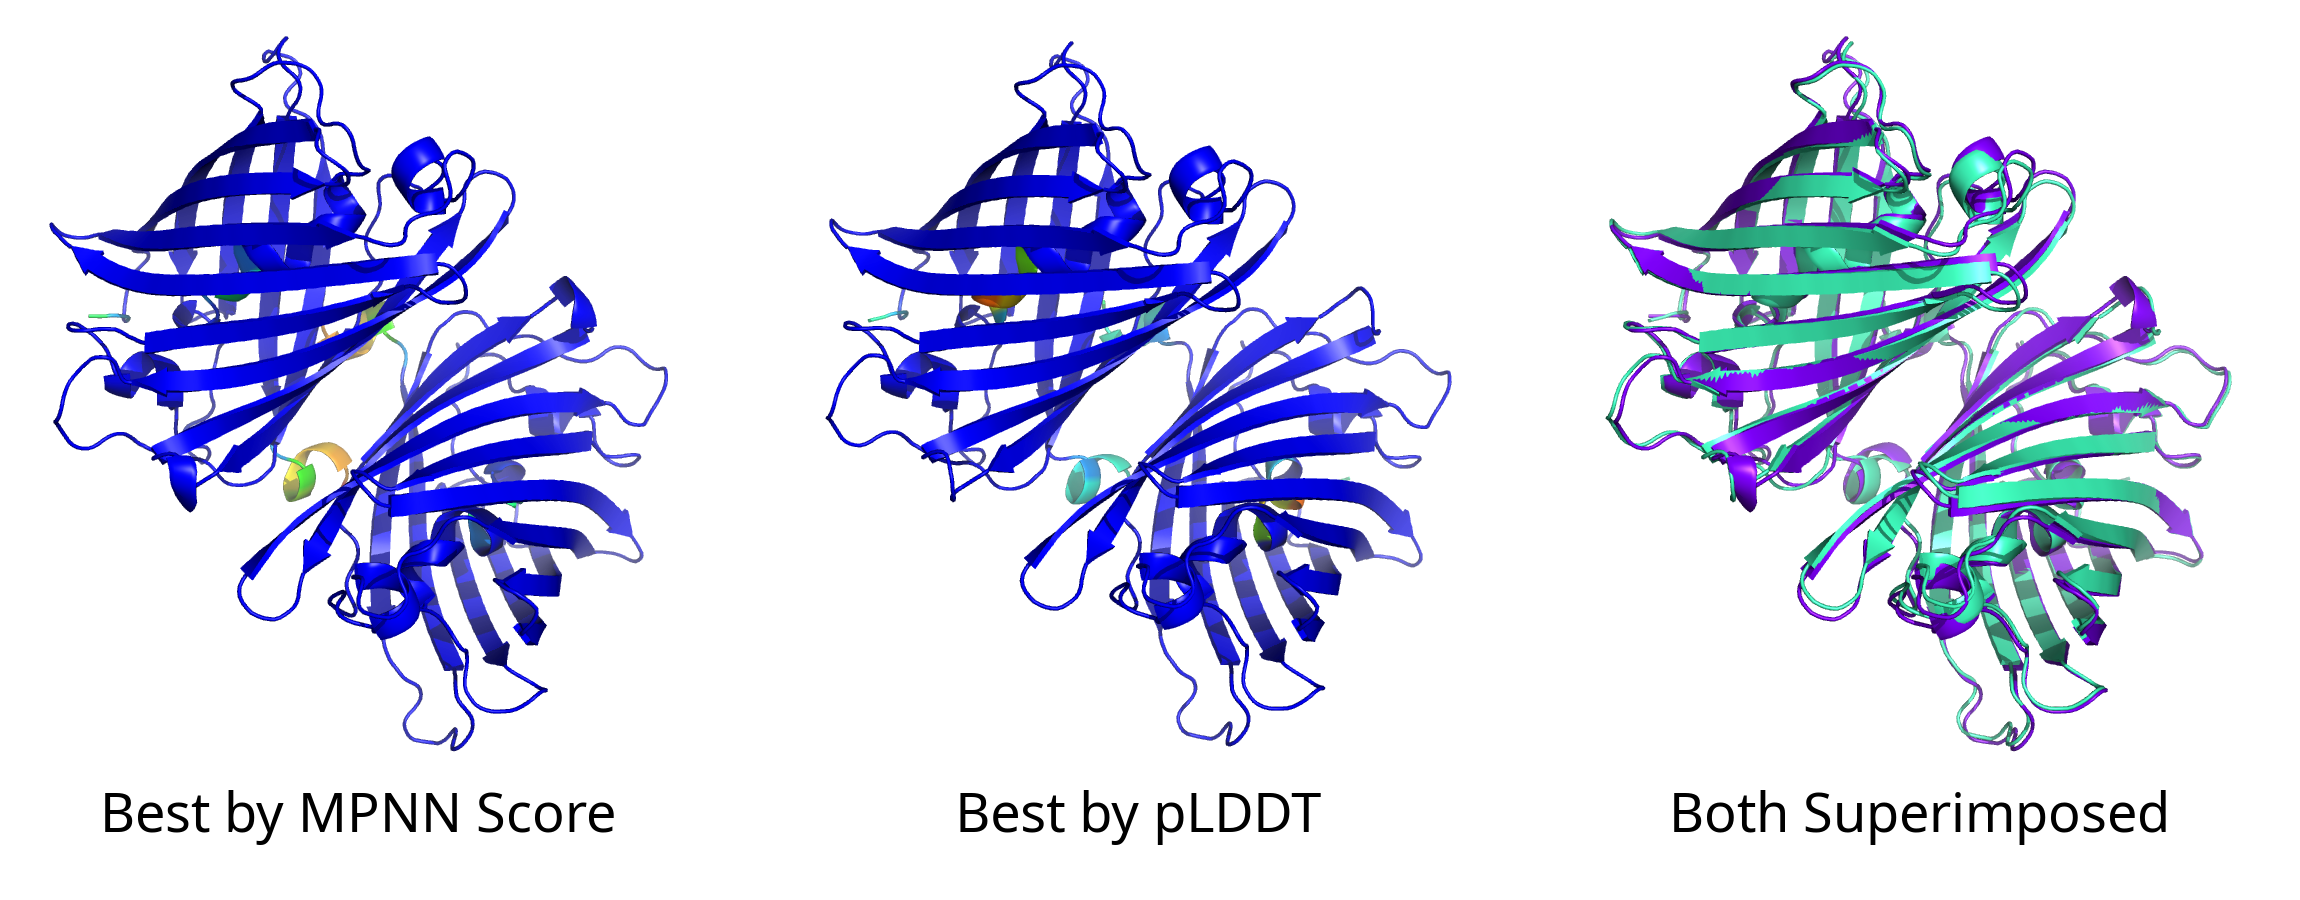 Predicted structures of best mutant according to plddt colored by plddt, best mutant according to ProteinMPNN Score colored by plddt, and both structures superimposed on each other, respectively.